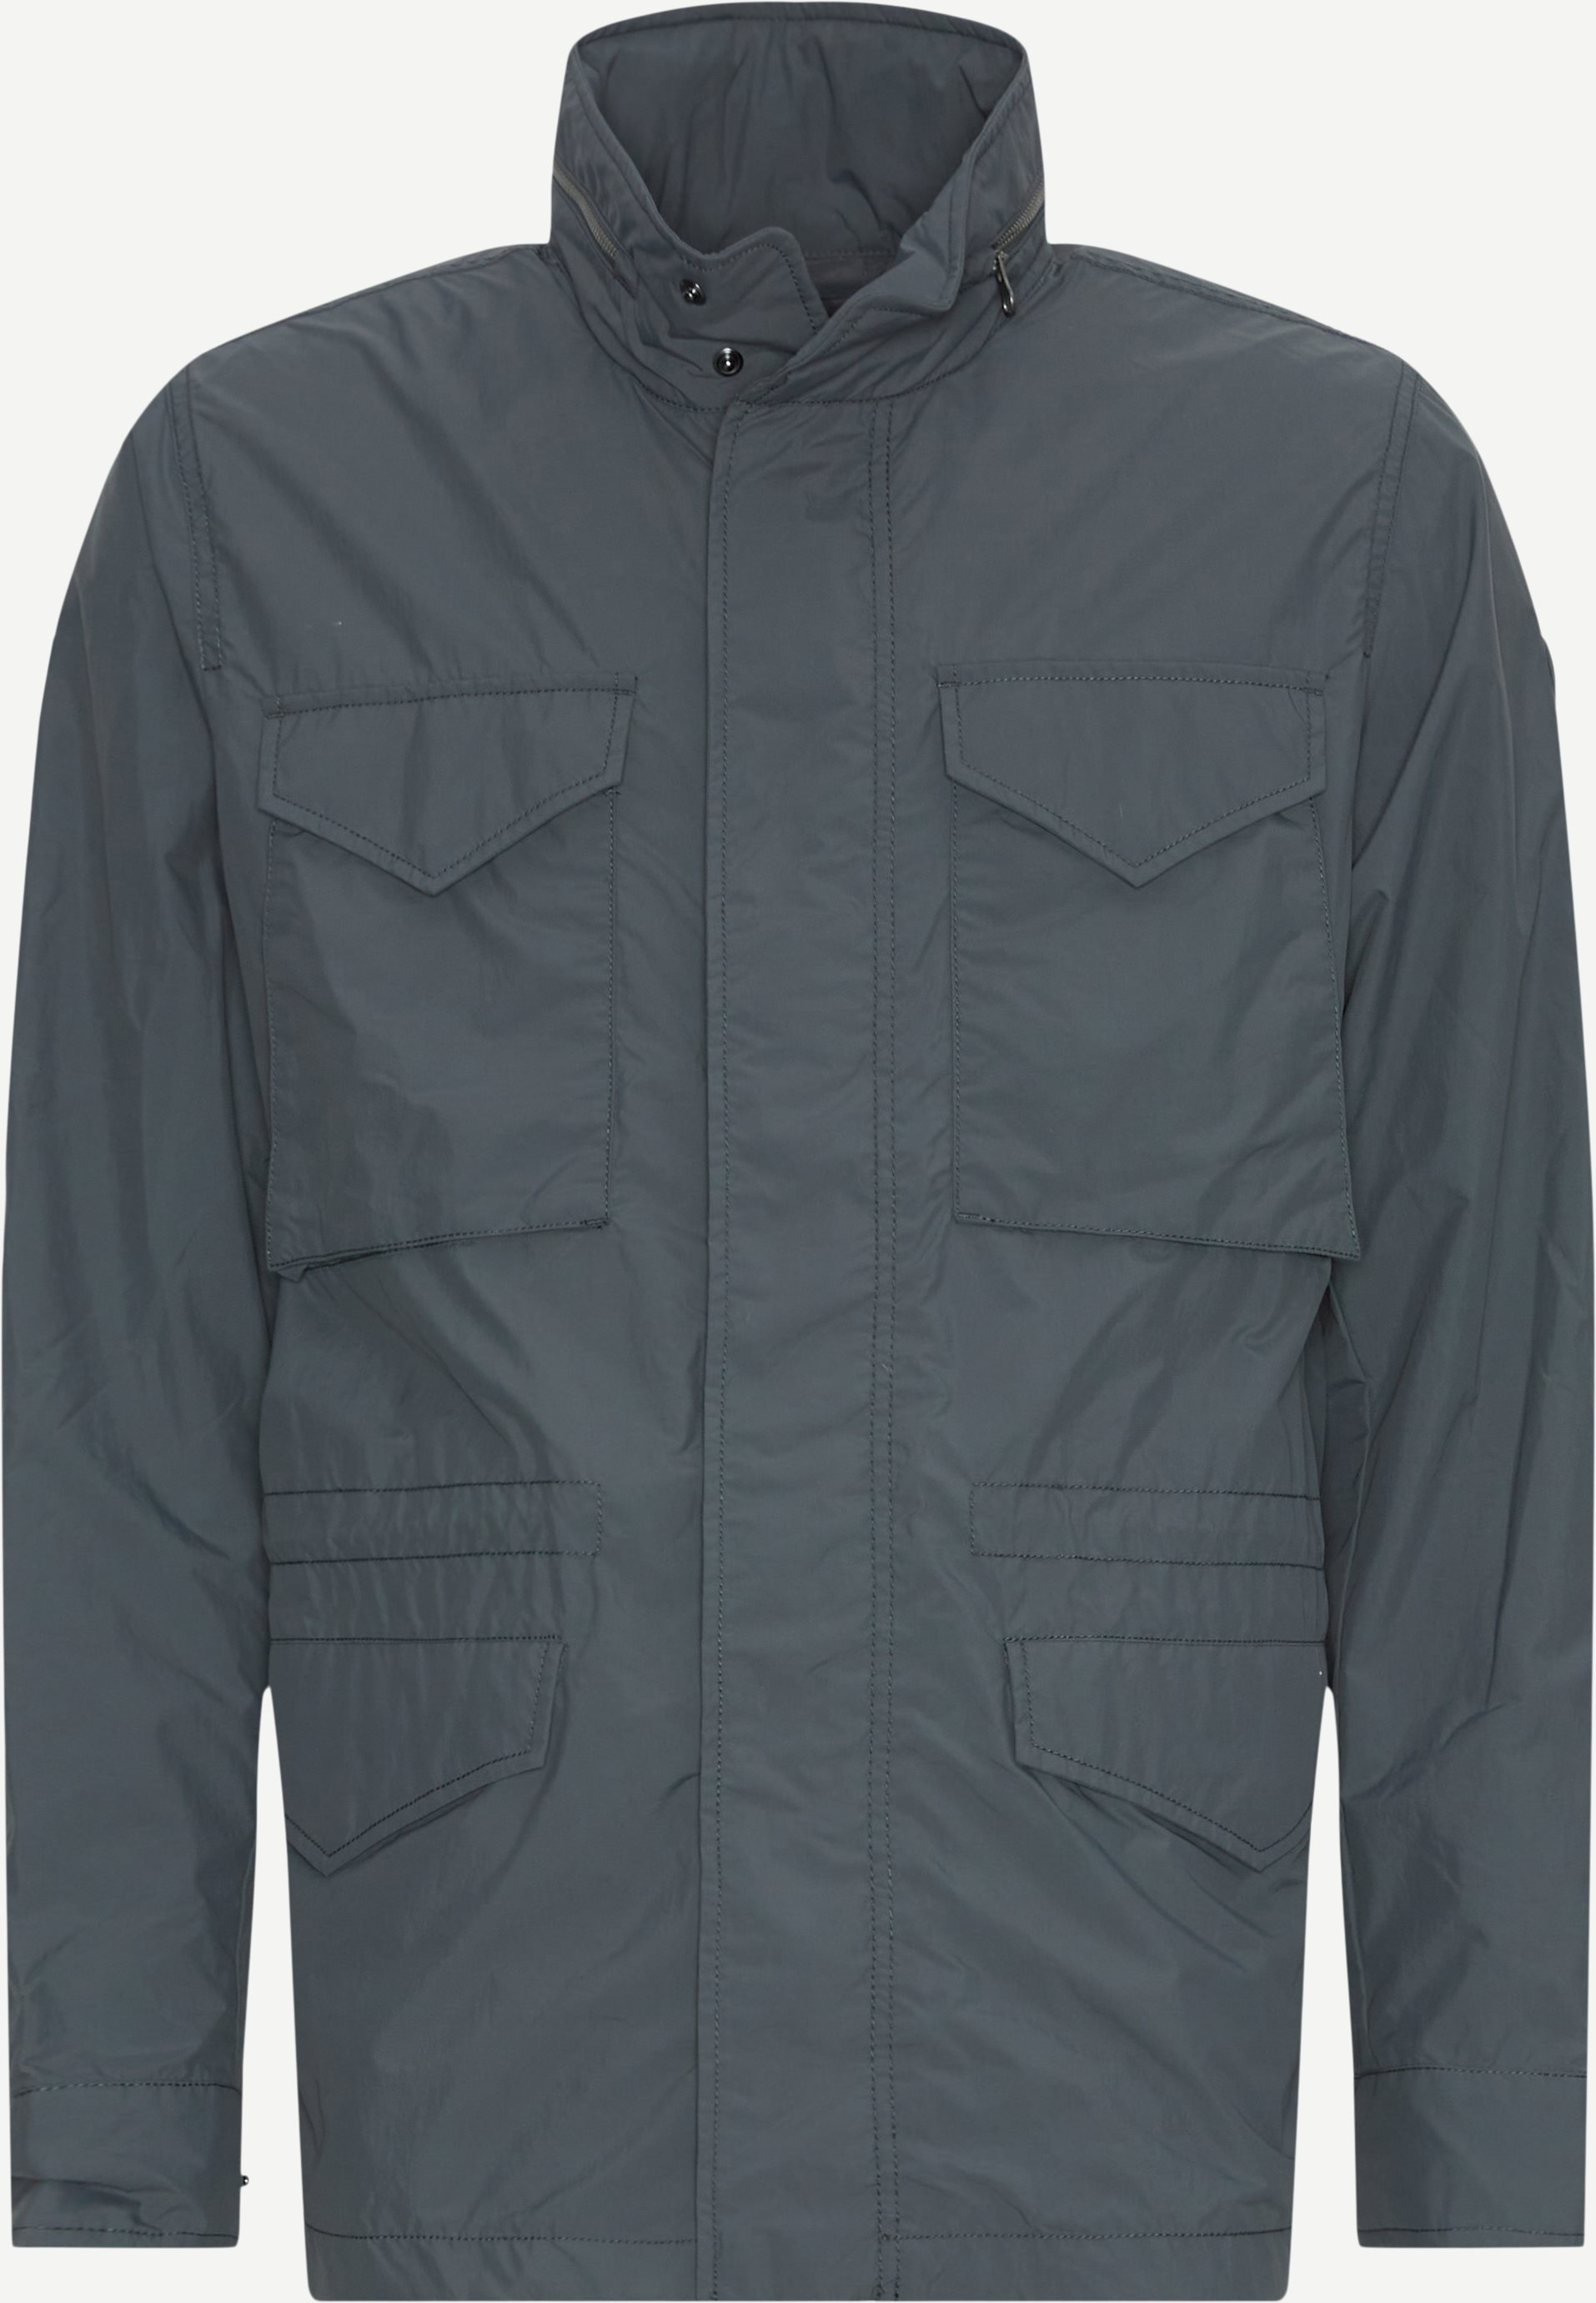 Save The Duck Jackets MAKO JACKET D31568M COFY18 Grey